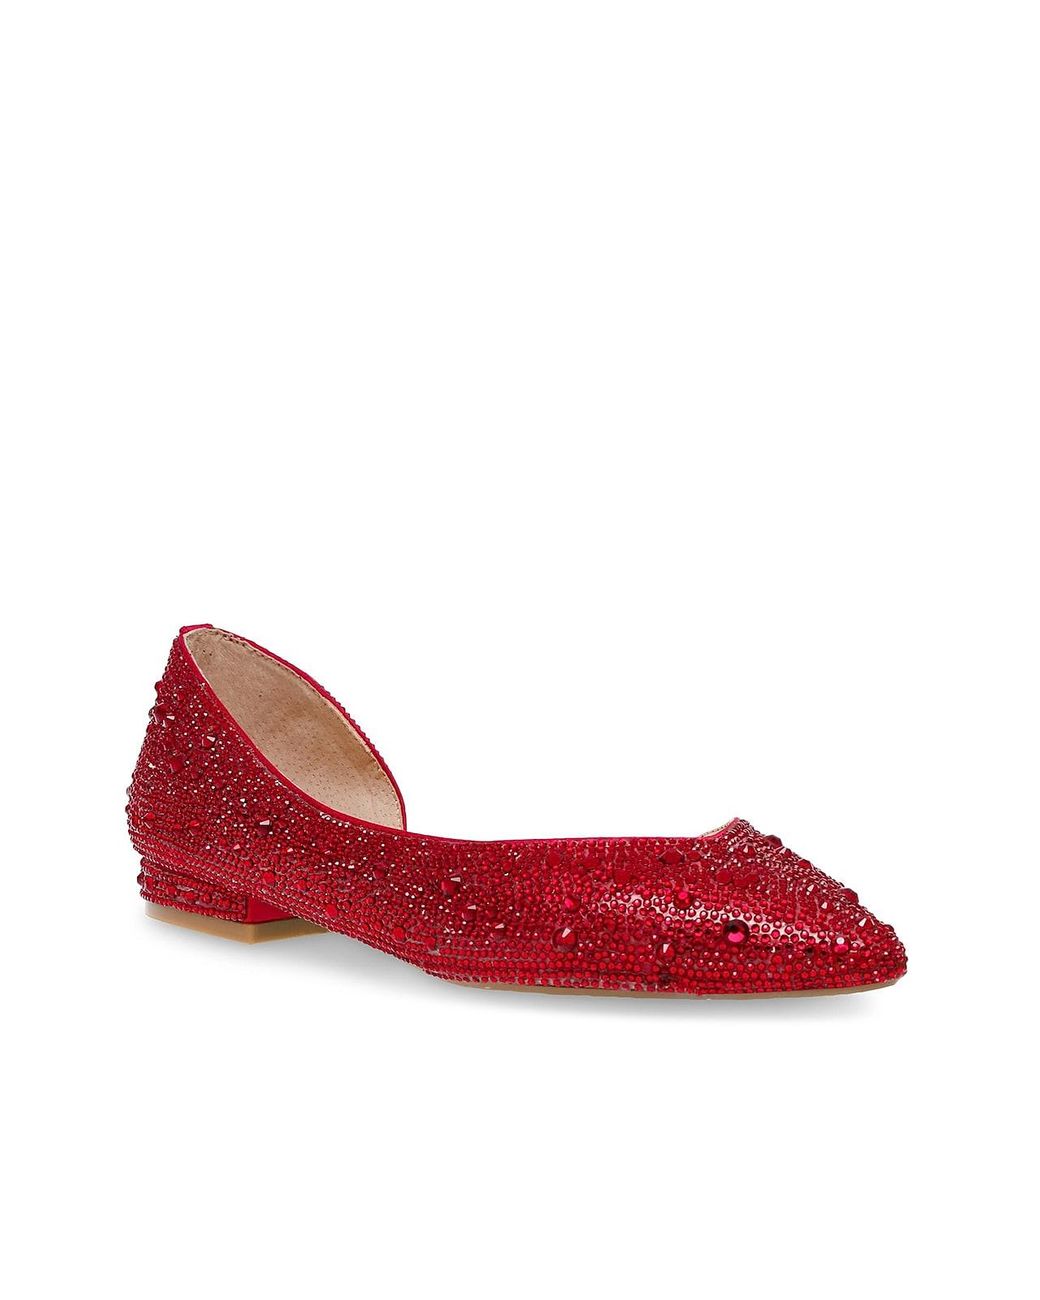 Betsey Johnson Reeve Ballet Flat in Red | Lyst